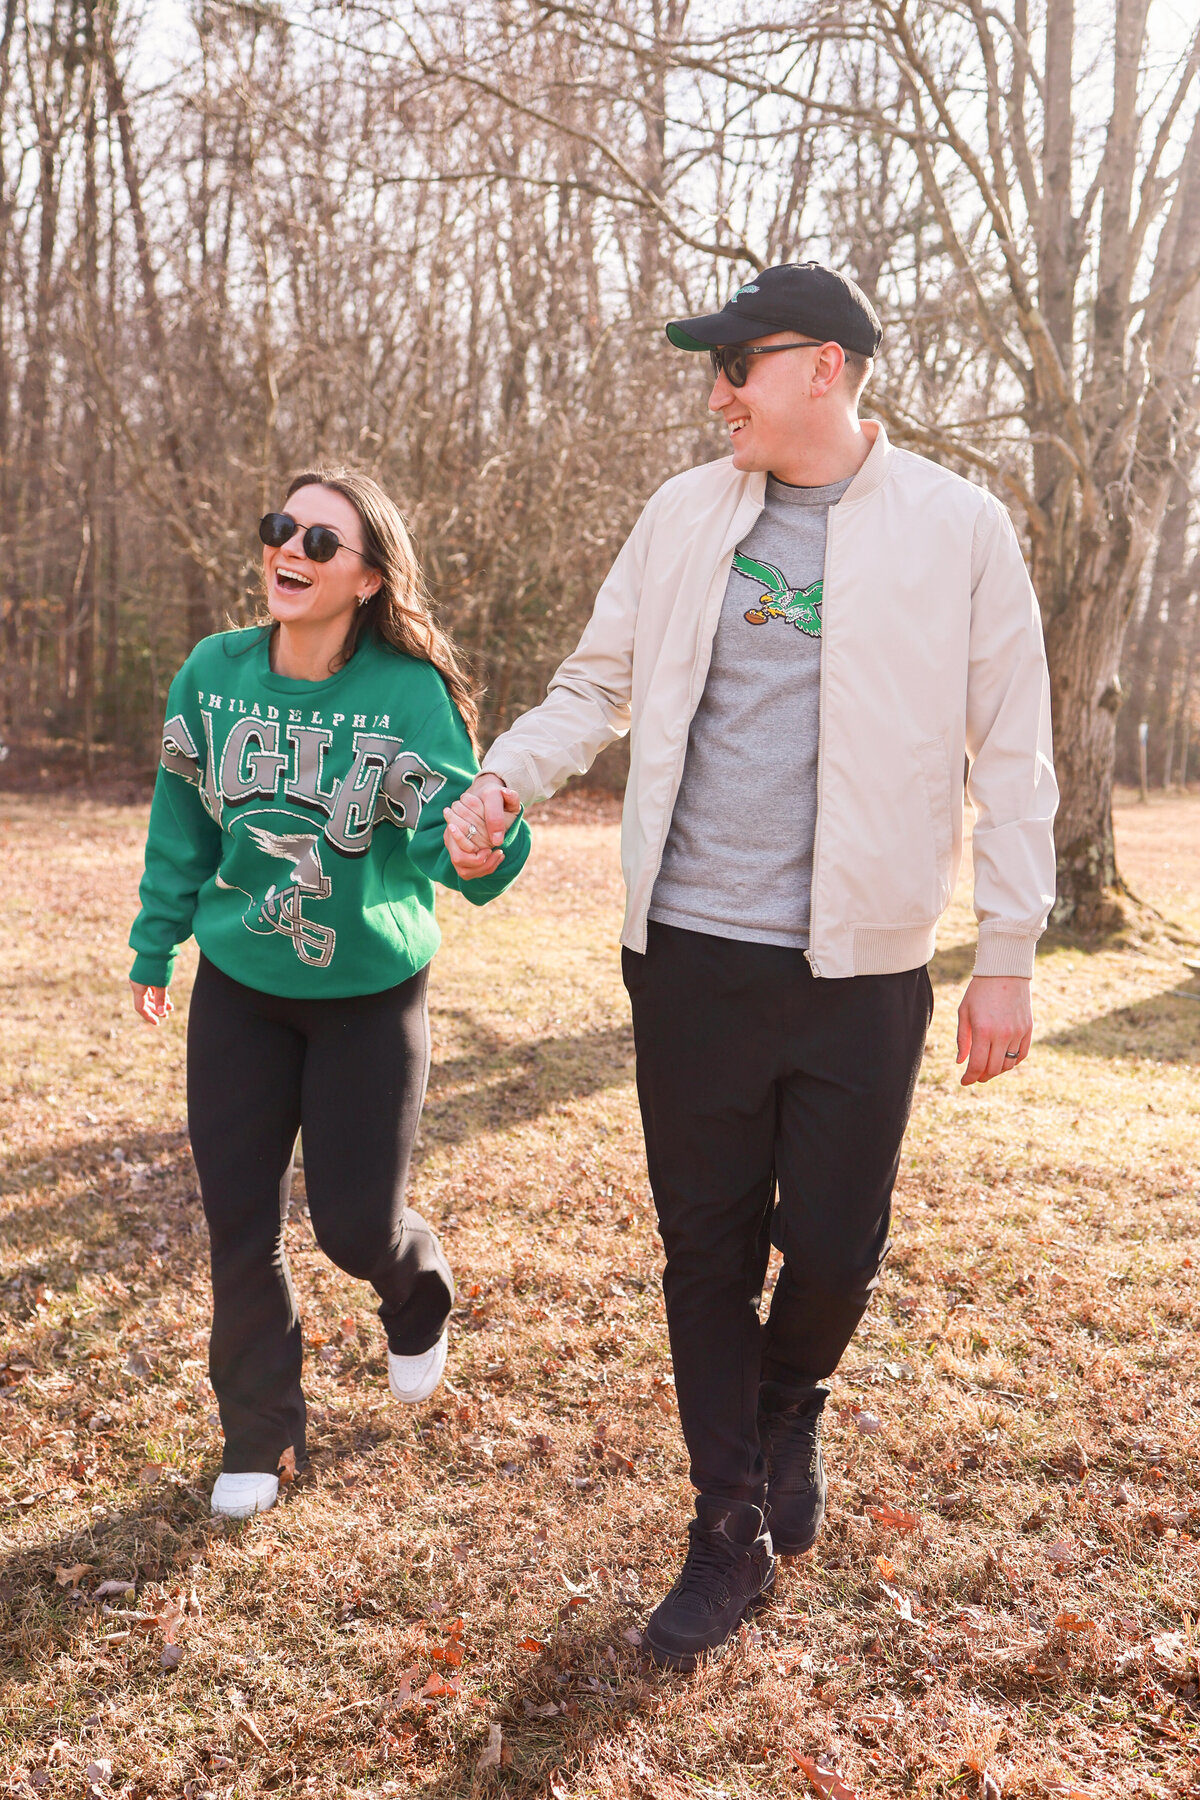 husband and wife wearing philadelphia eagles football sweaters and sunglasses and laughing